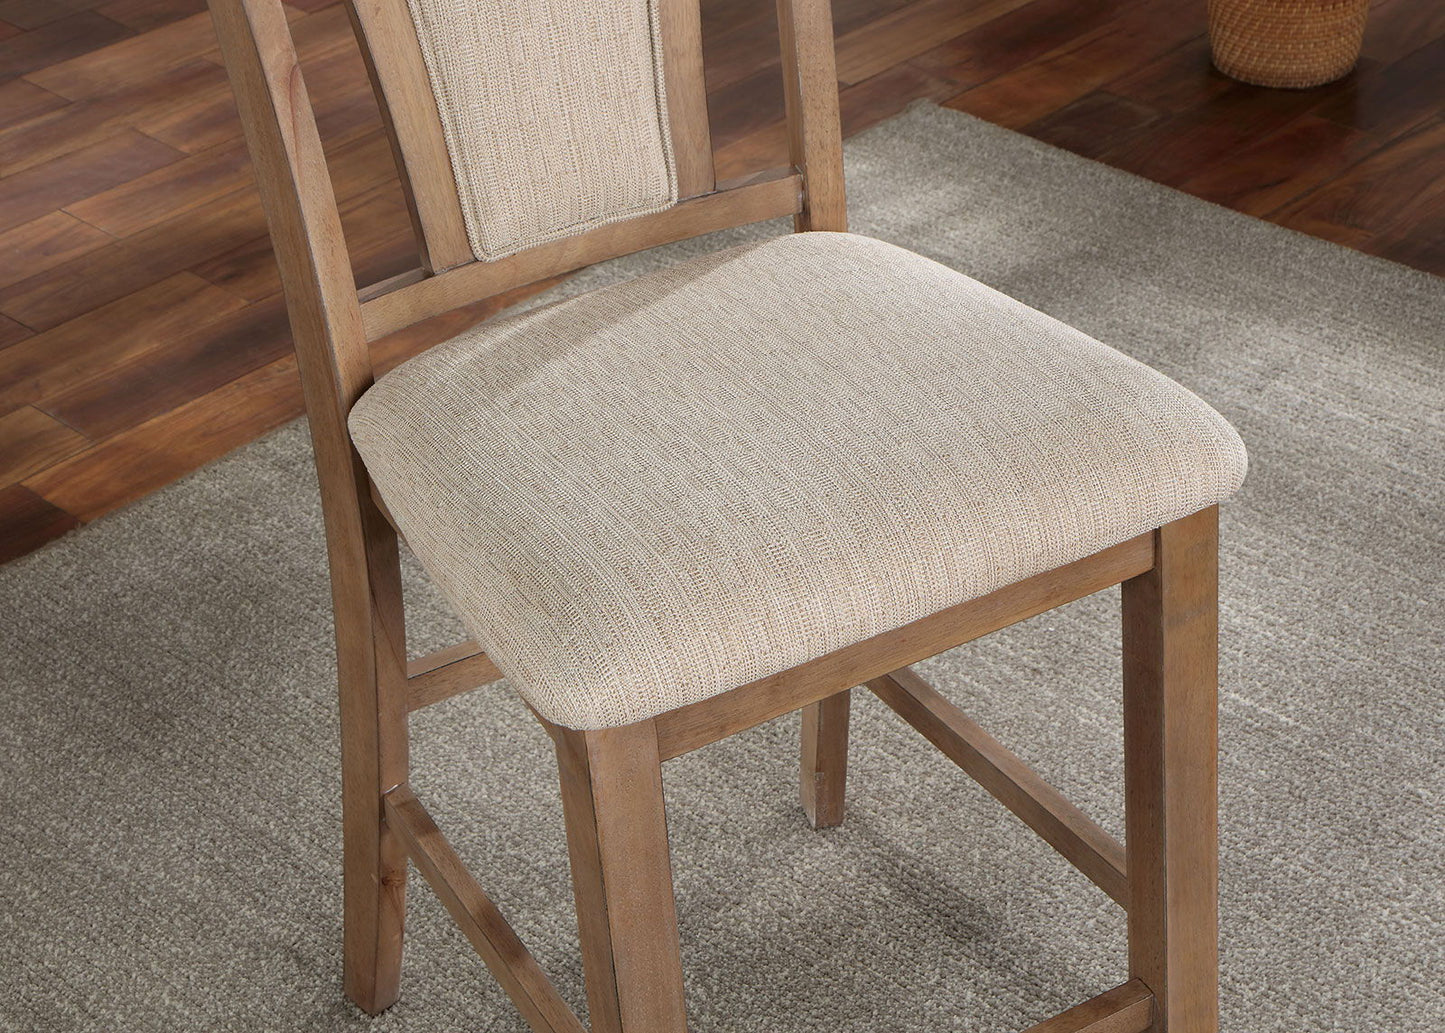 Upminster - Counter Height Chair (Set of 2) - Natural Tone / Beige